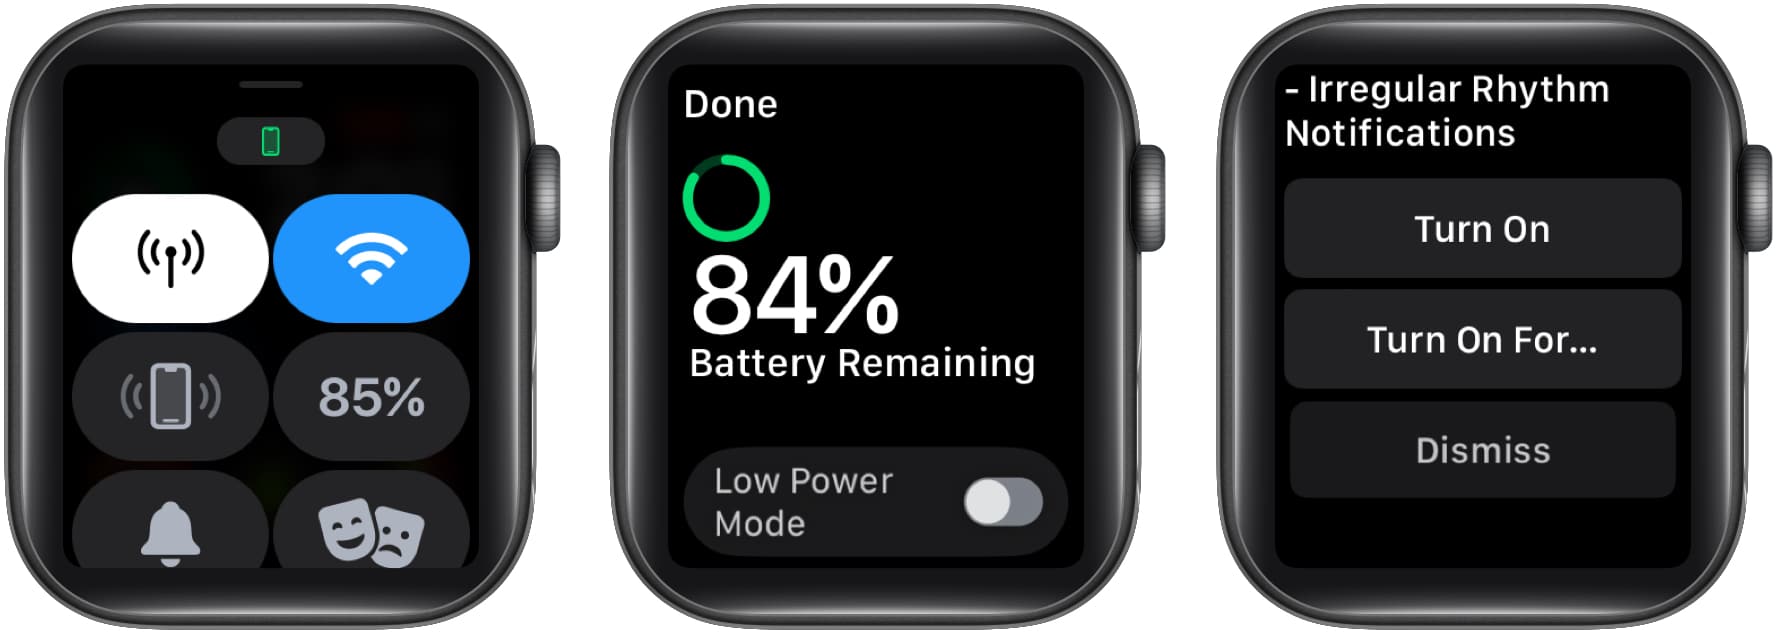 How to enable Low Power Mode on your Apple Watch